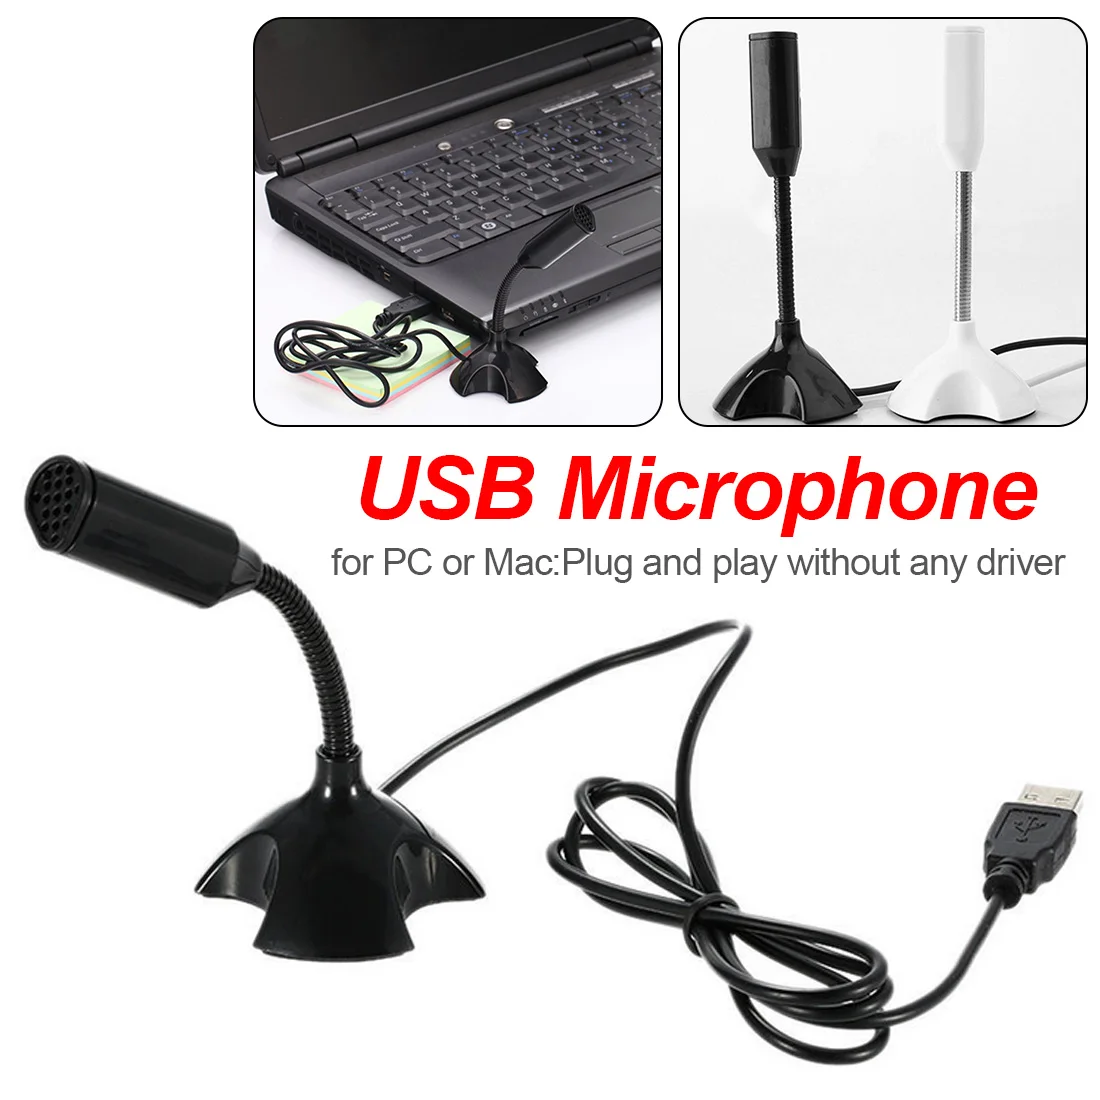 vipexcellence8 Adjustable USB Desktop Microphone Mini Studio Speech for Desktop Notebook PC Mic Microphone With Stand Black 